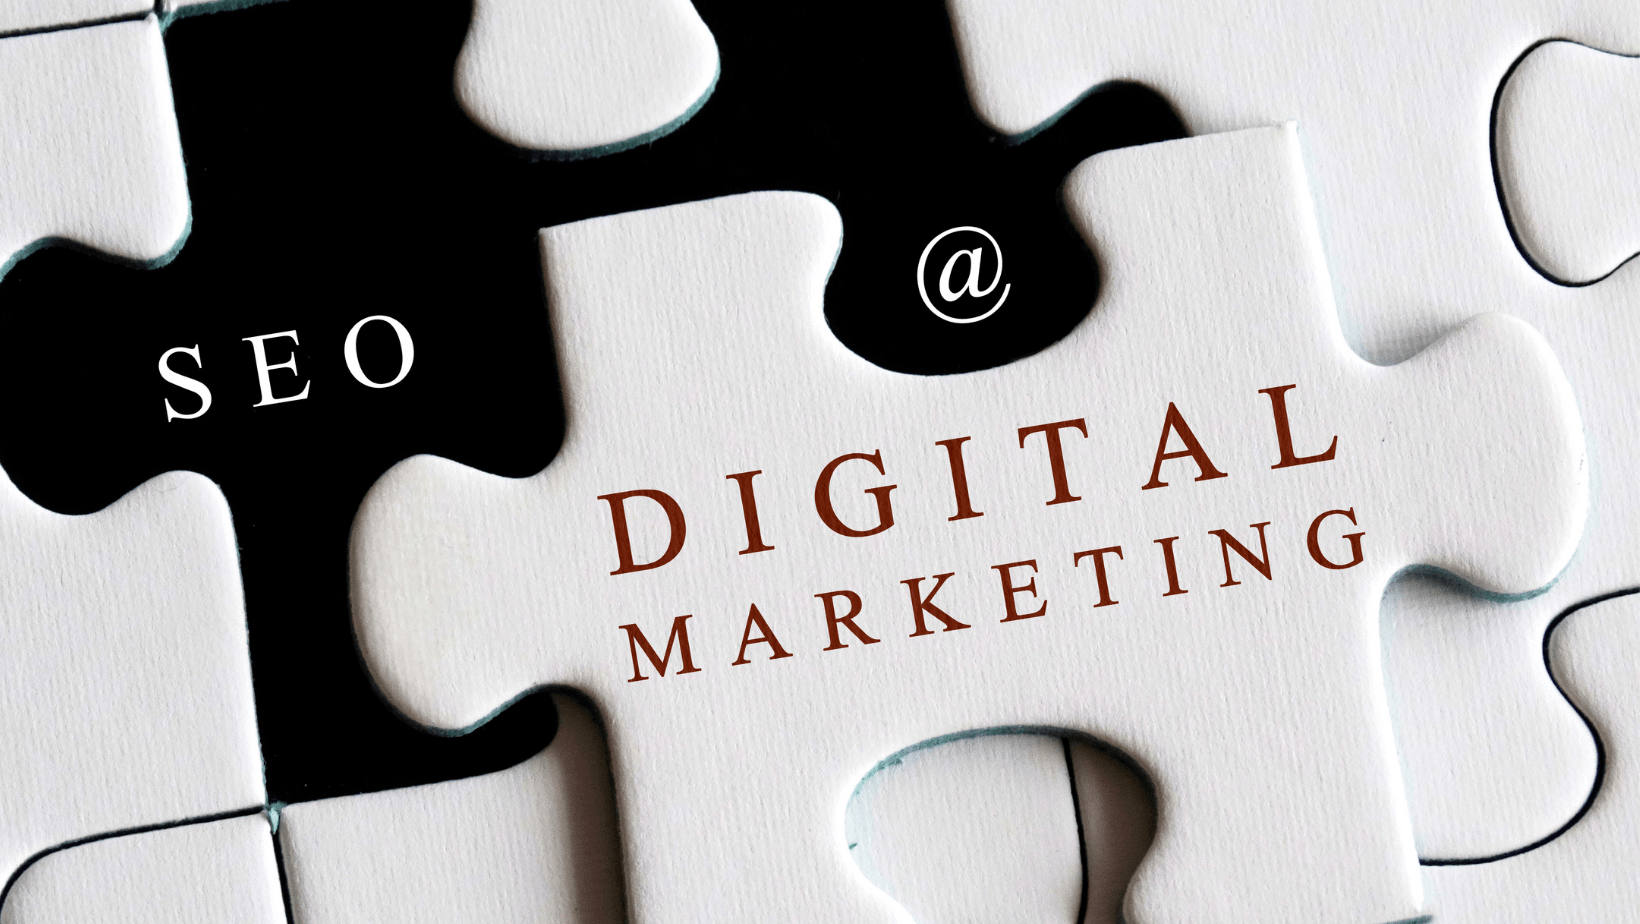 What exactly does Digital Marketing Services entail?